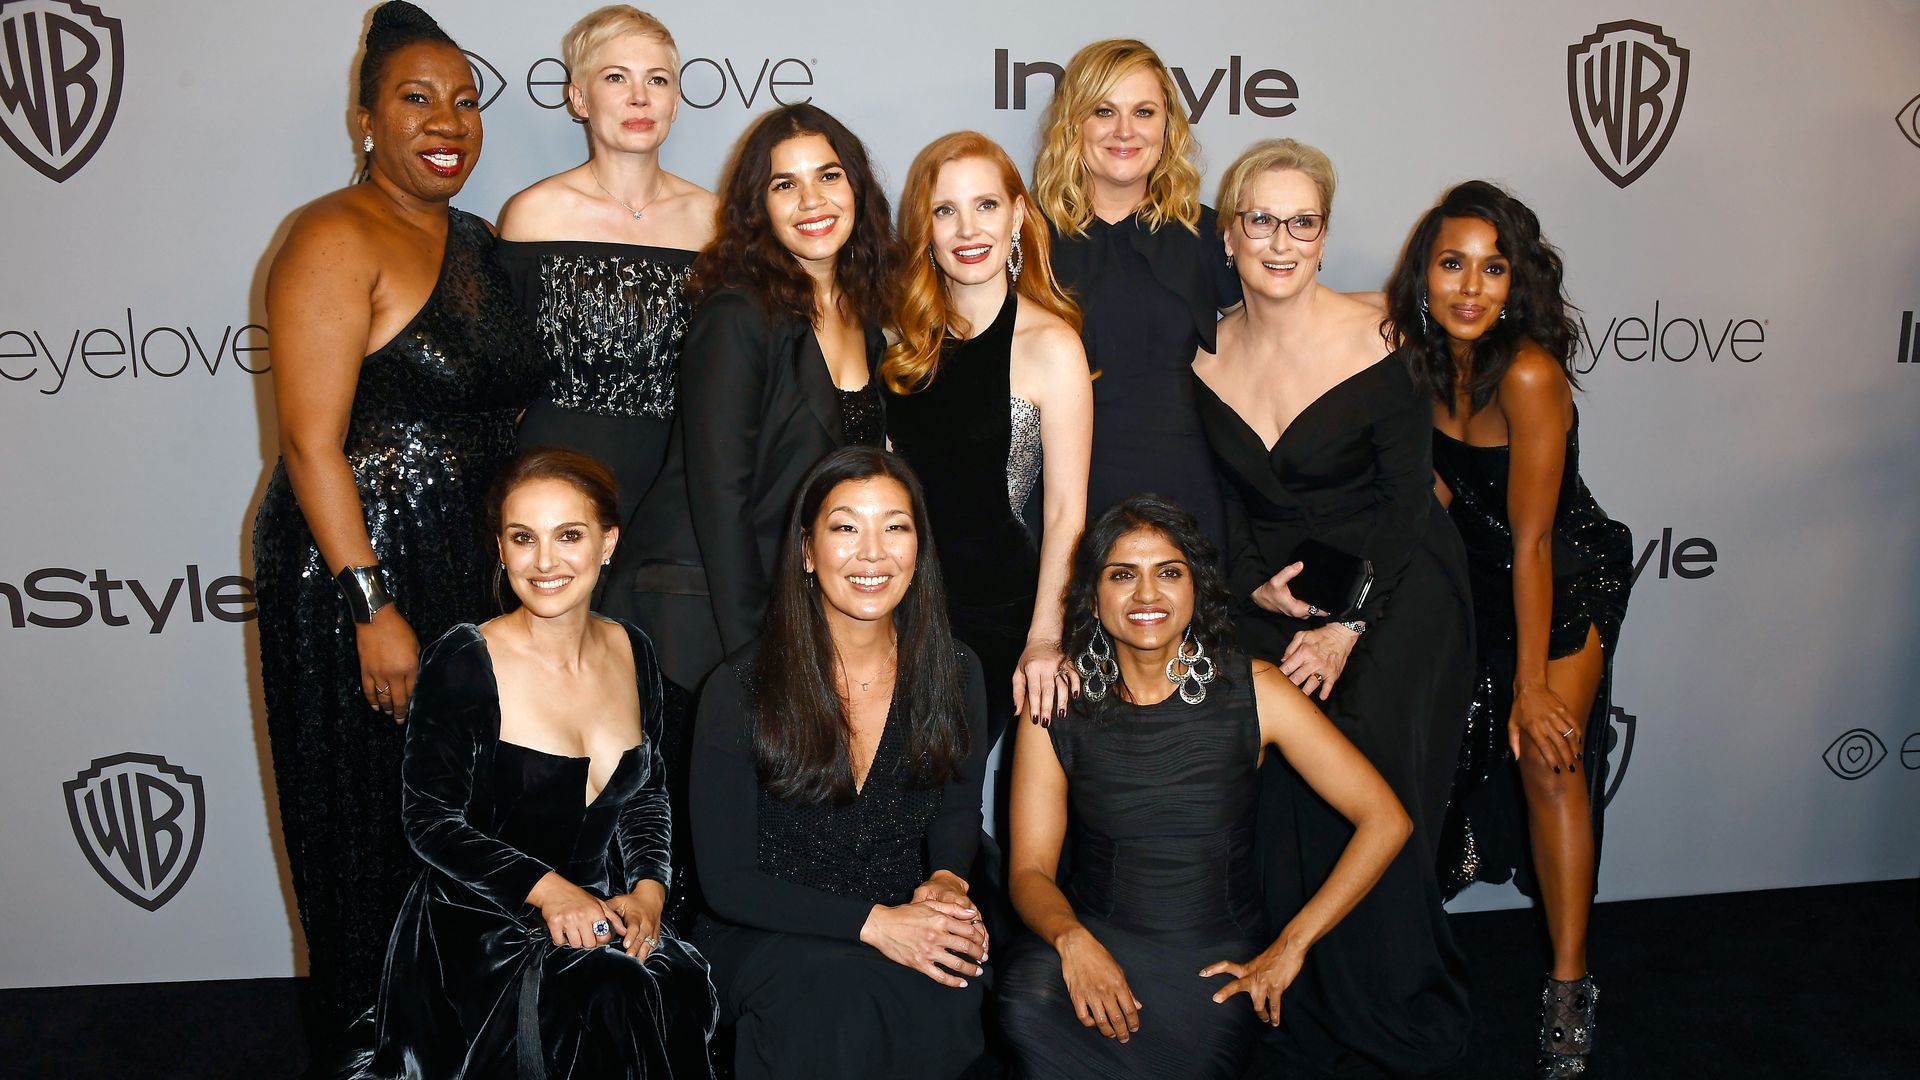 Photo of actresses at the Golden Globes wearing all black.